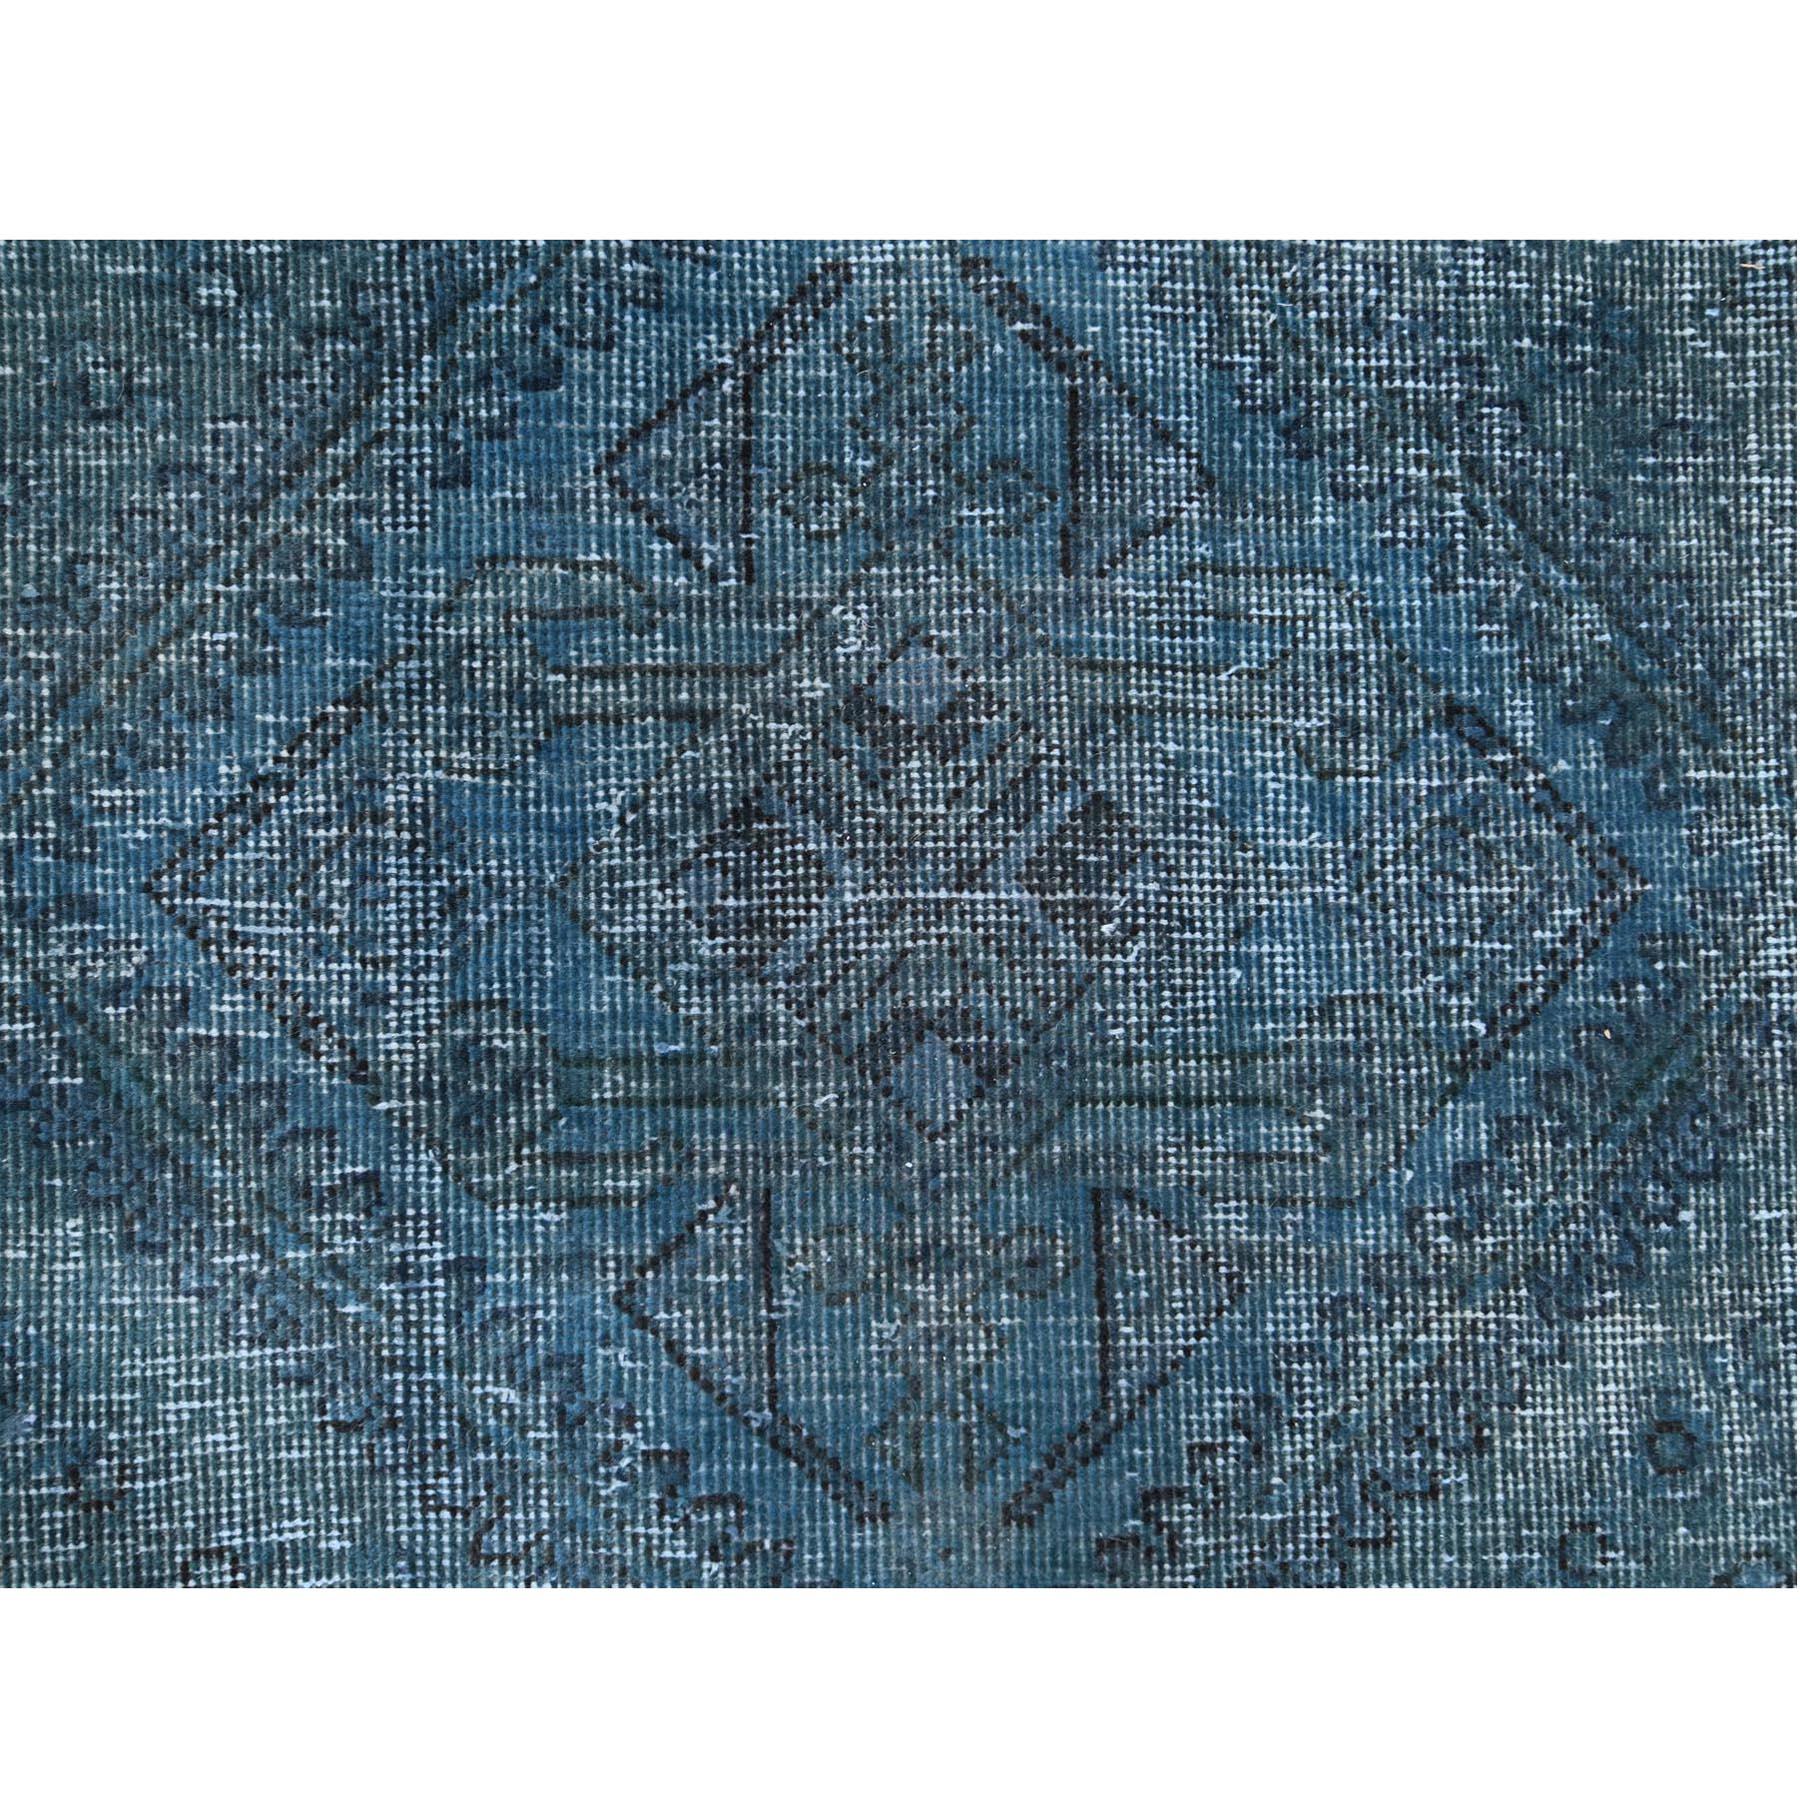 Teal Persian Shiraz Serrated Medallion Design Old Worn Wool Hand Knotted Rug 3